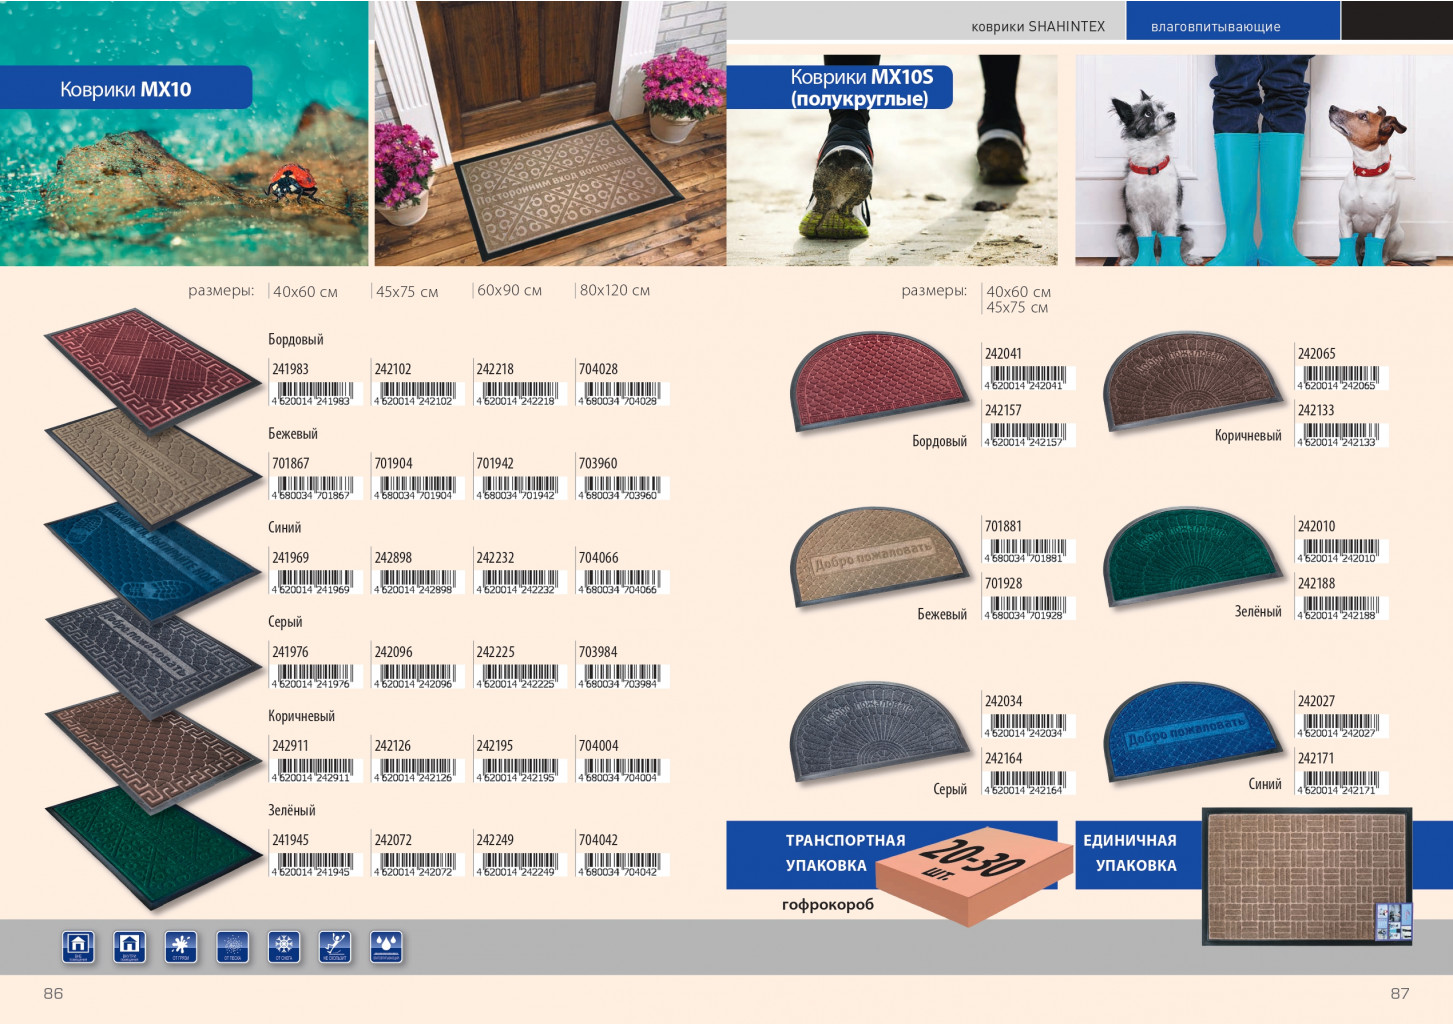 Catalog2019 pages-to-jpg-0044.jpg